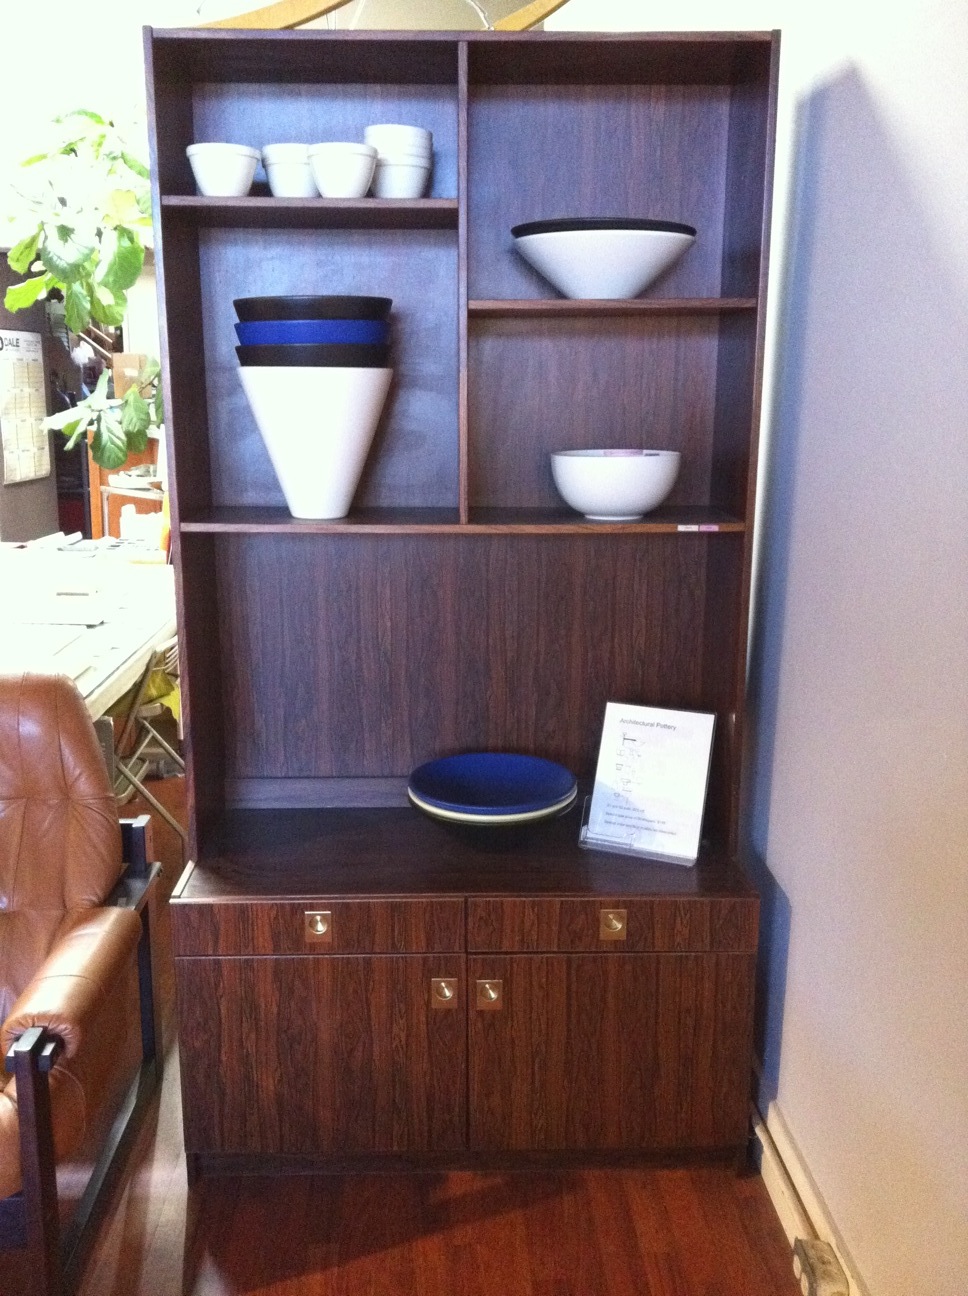 Rosewood storage unit made in Denmark by Mobler.  41 inches wide, 19 inches deep, 79.5 inches high.  SALE $895.  SKU# F0028